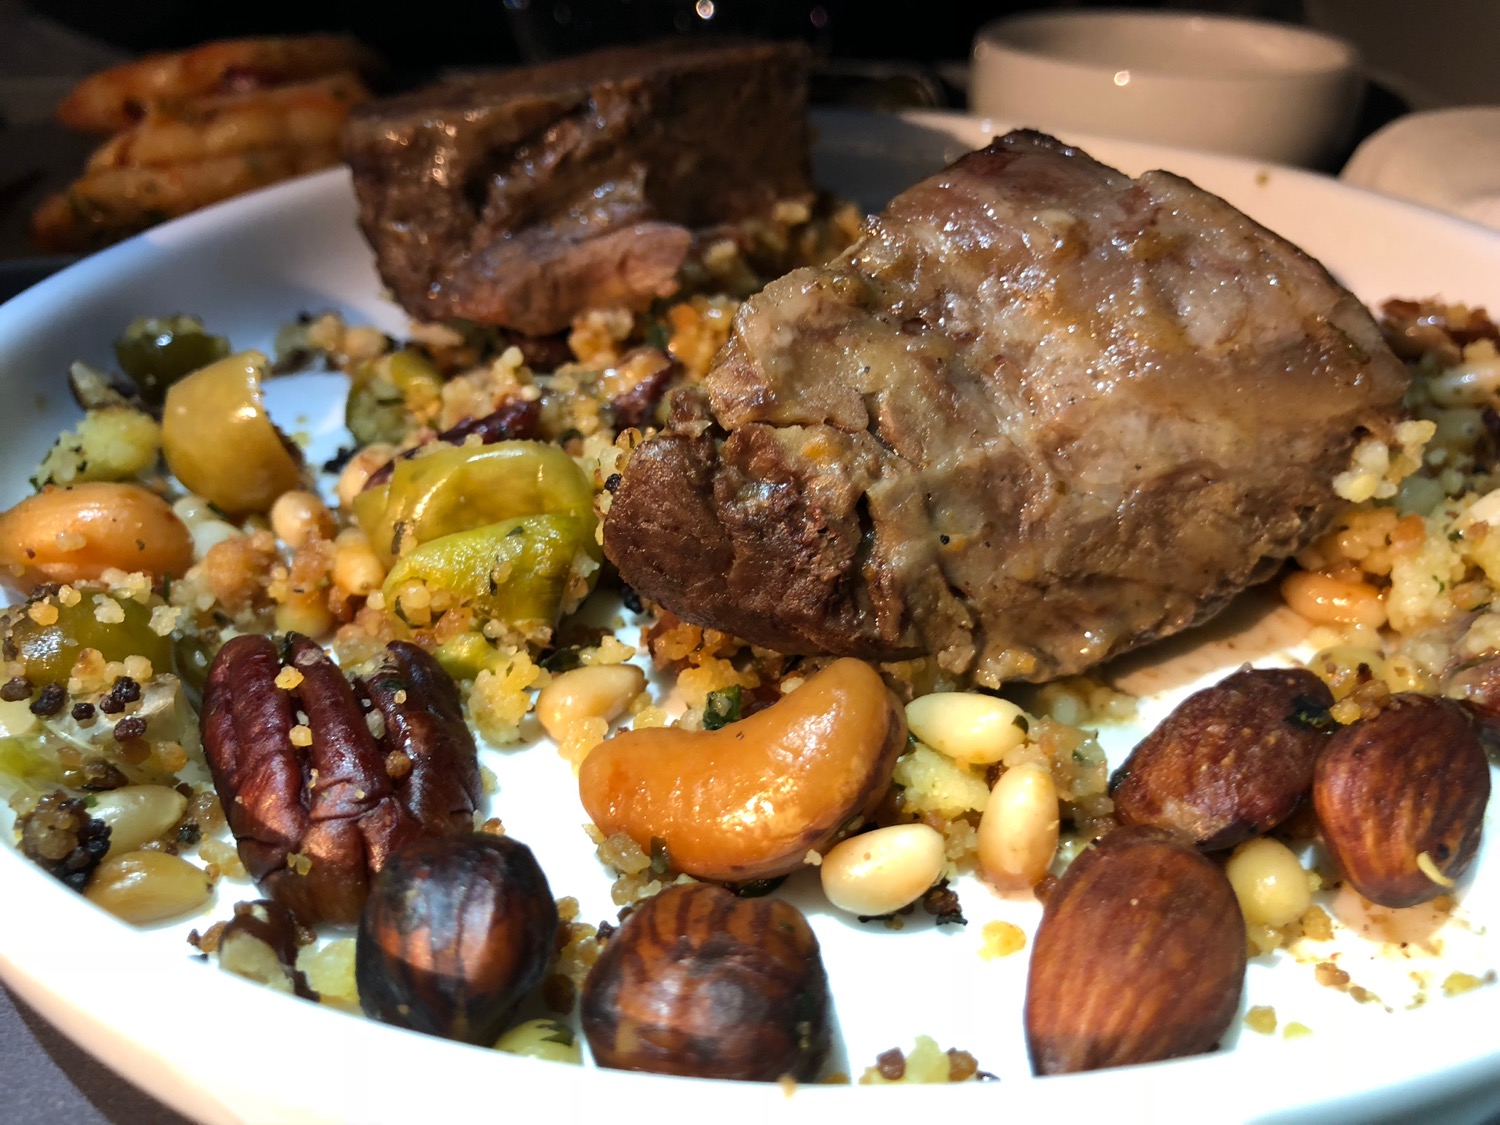 a plate of food with meat and nuts